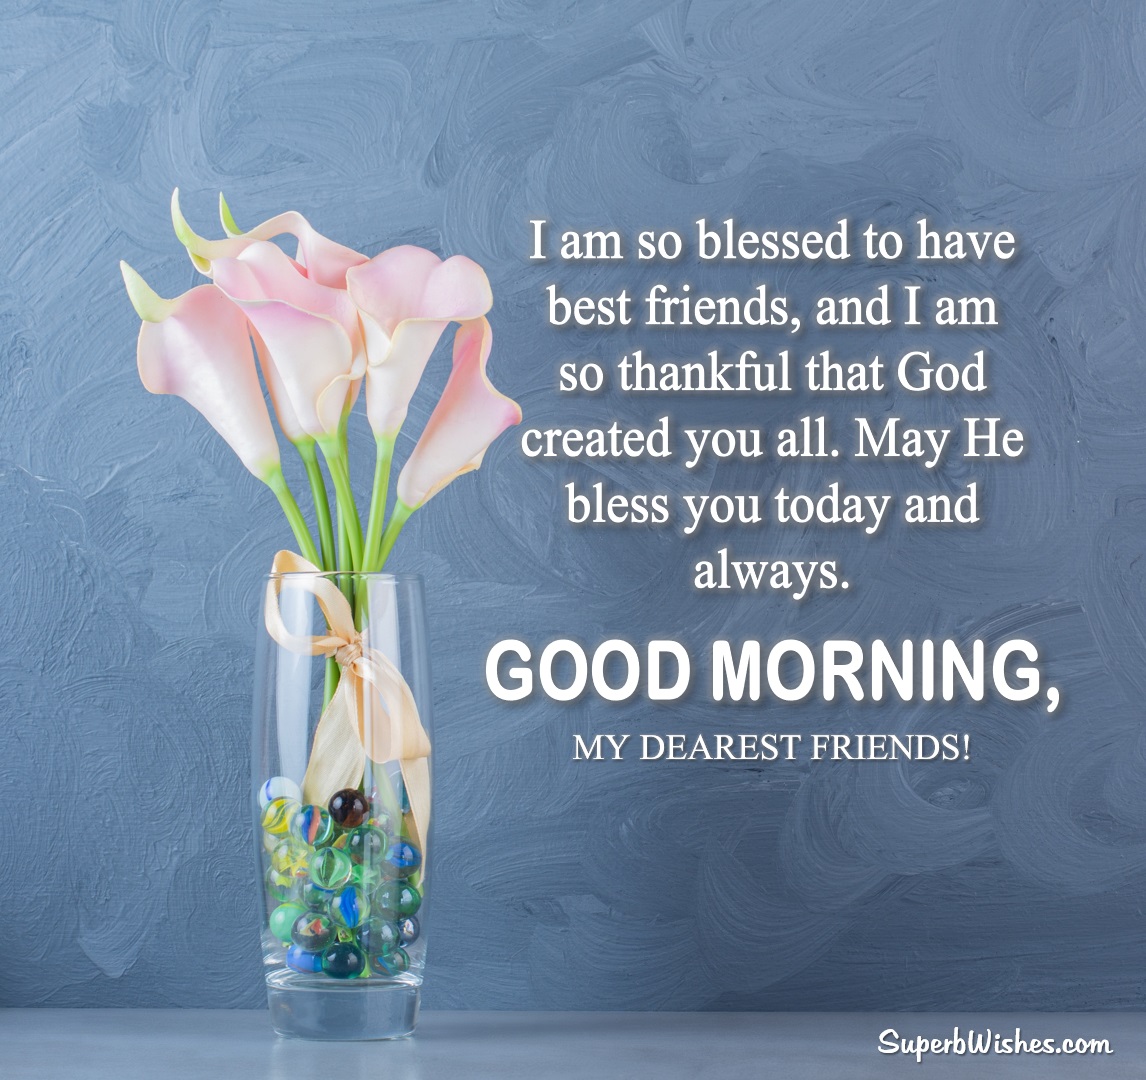 Good Morning Wishes For Friends Images - God Bless You | SuperbWishes